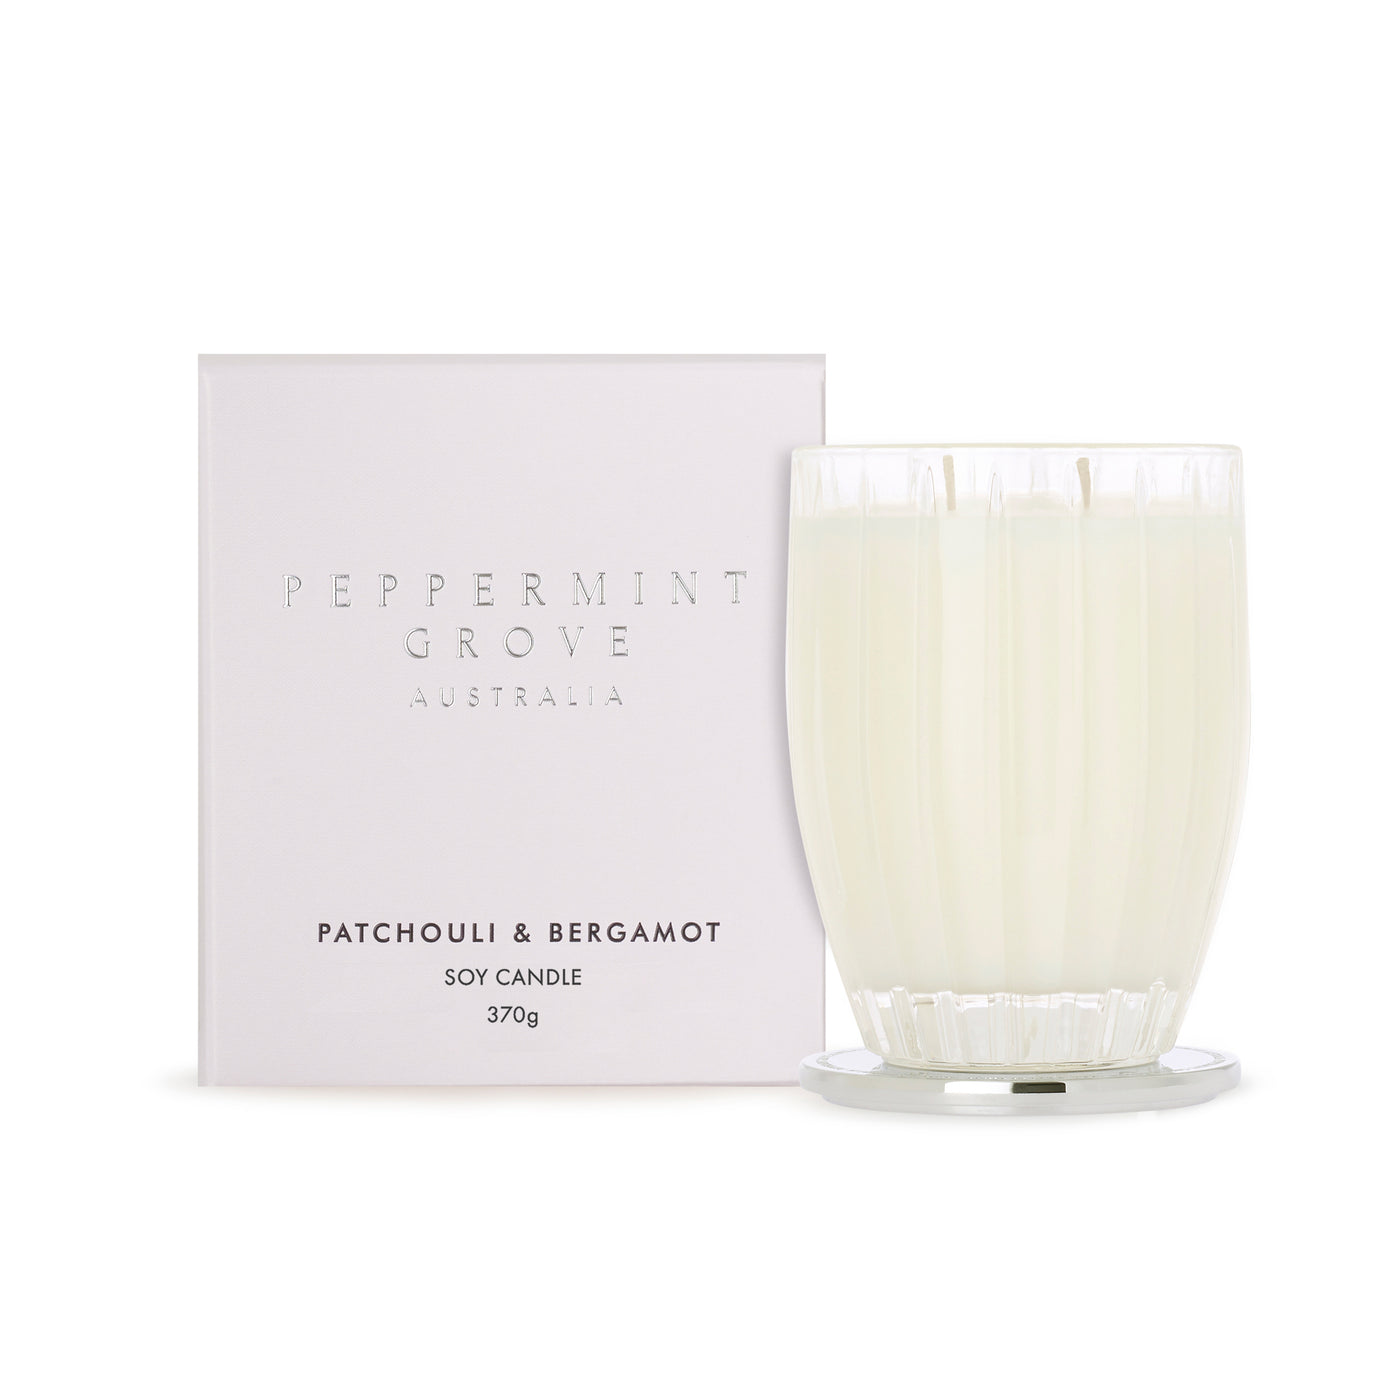 Patchouli & Bergamot Soy Candle- Peppermint Grove